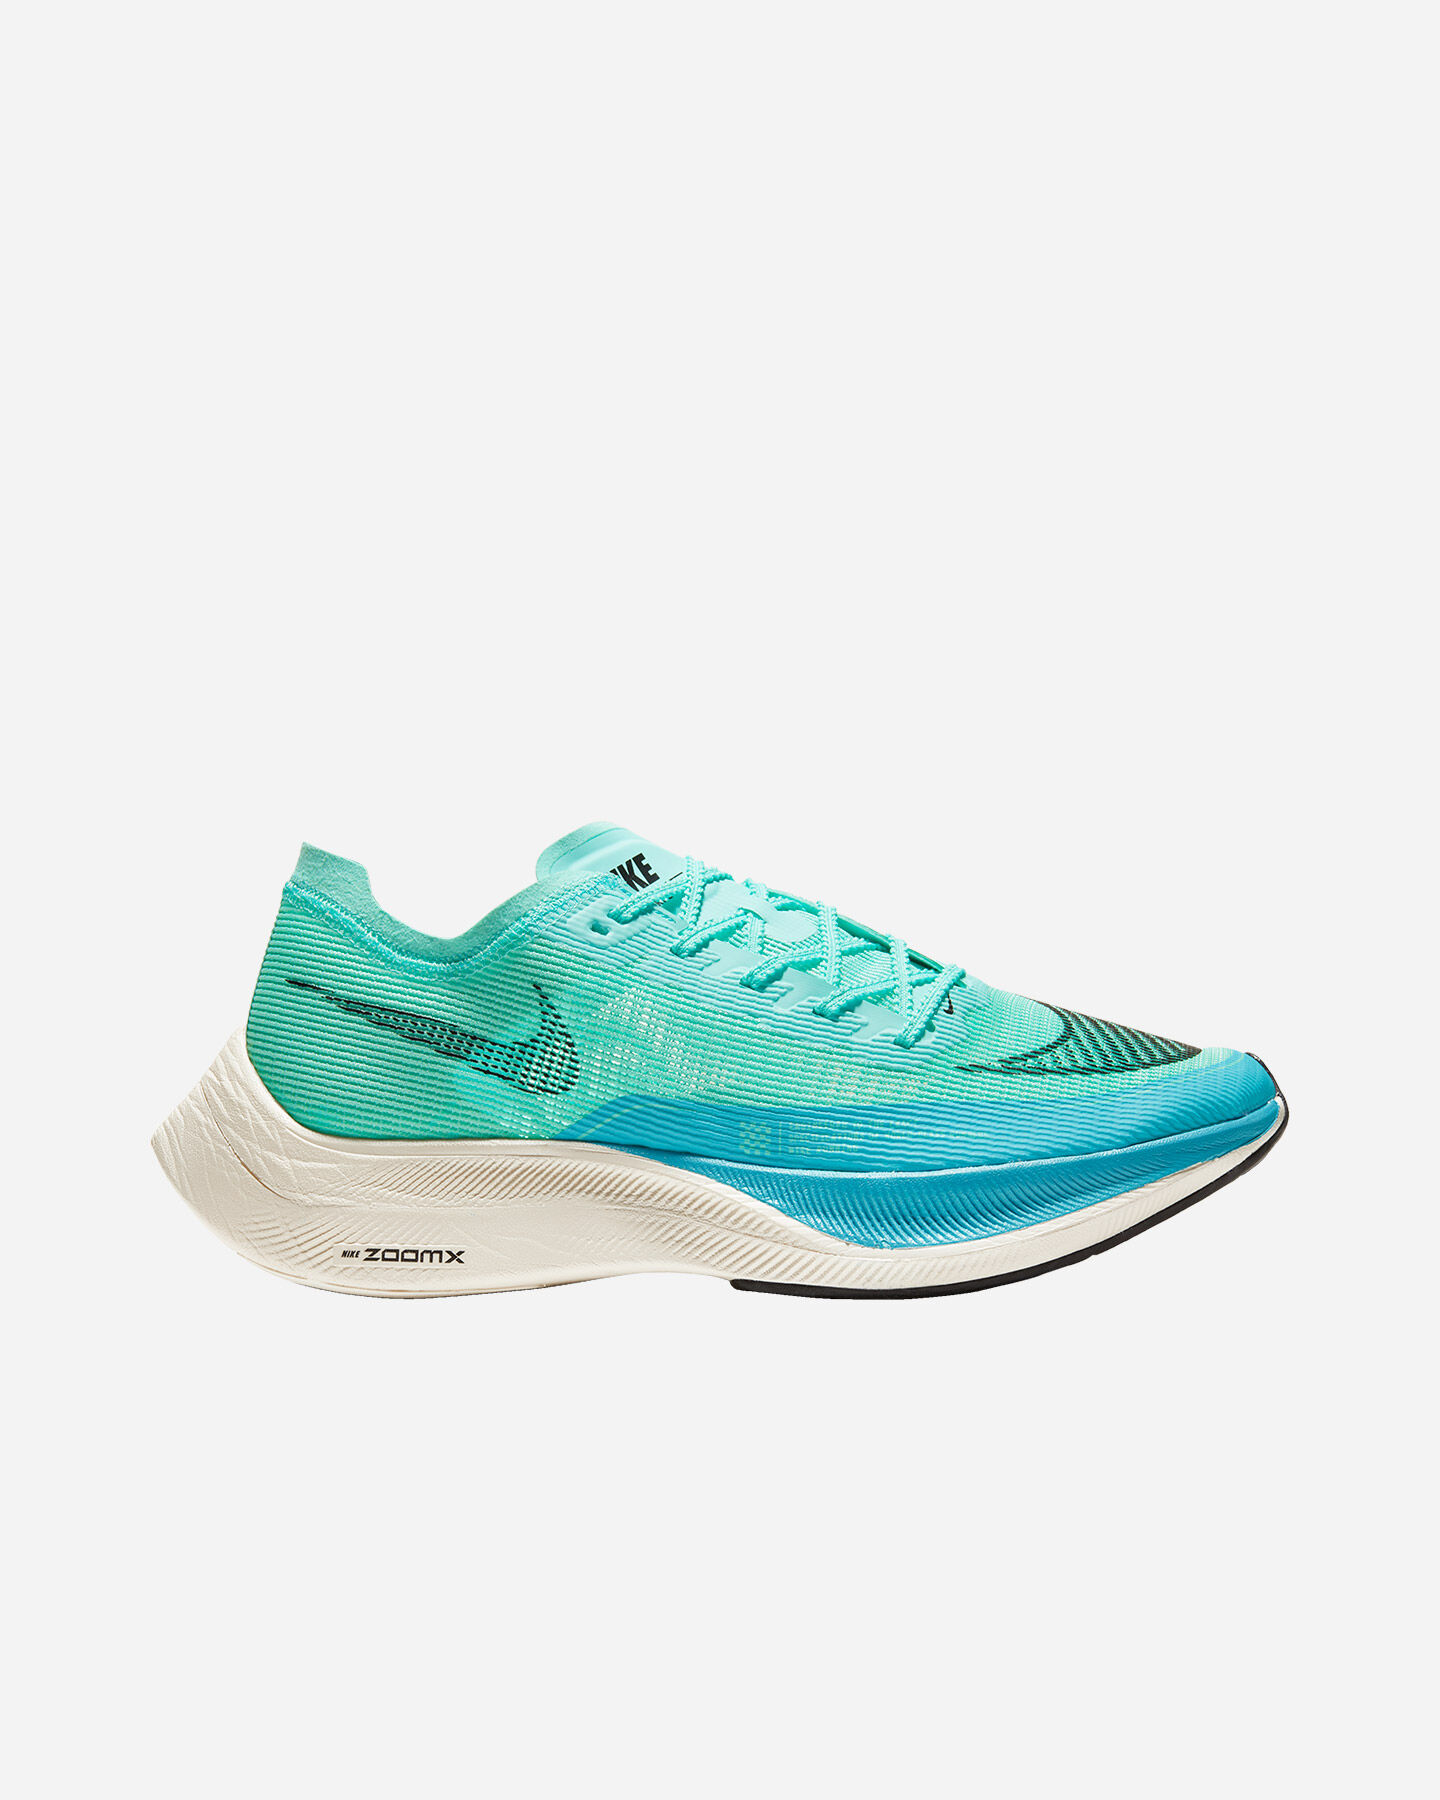  Scarpe running NIKE ZOOMX VAPORFLY NEXT% 2 M S5300174|300|6 scatto 0